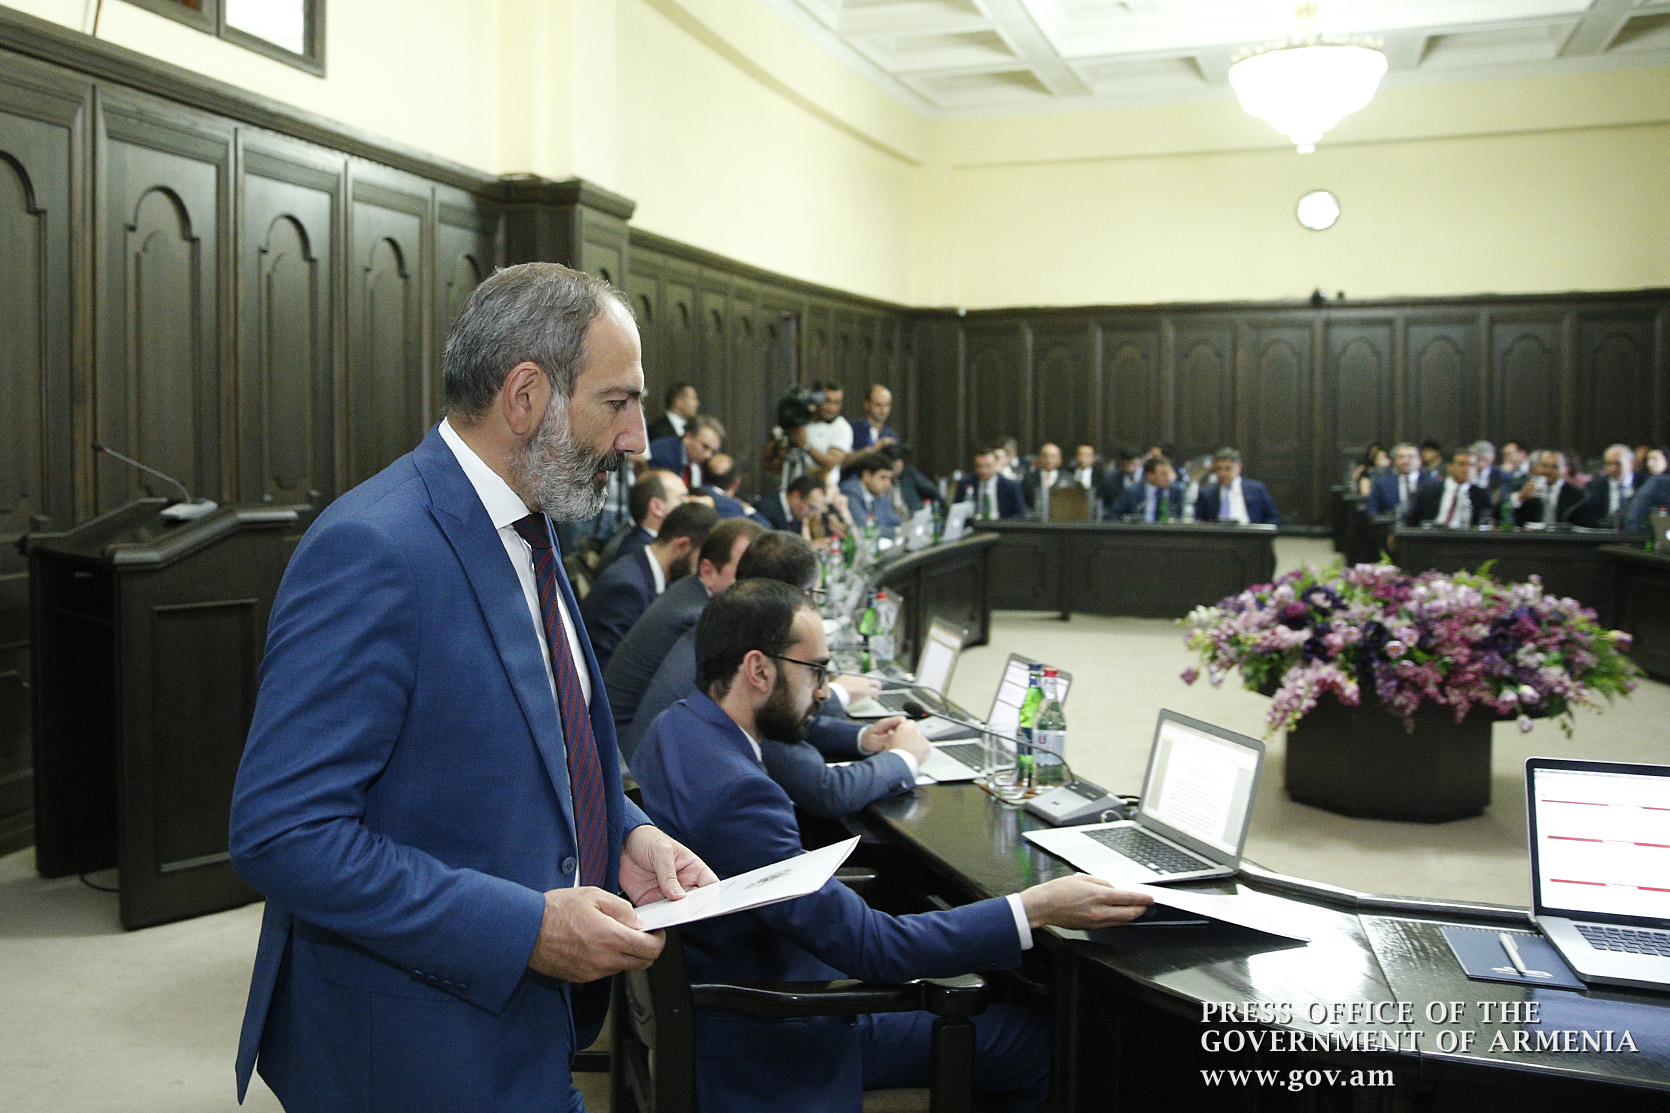 Nikol Pashinyan: ‘All participants in Manvel Grigoryan’s case must be exposed irrespective of their titles and social standings’